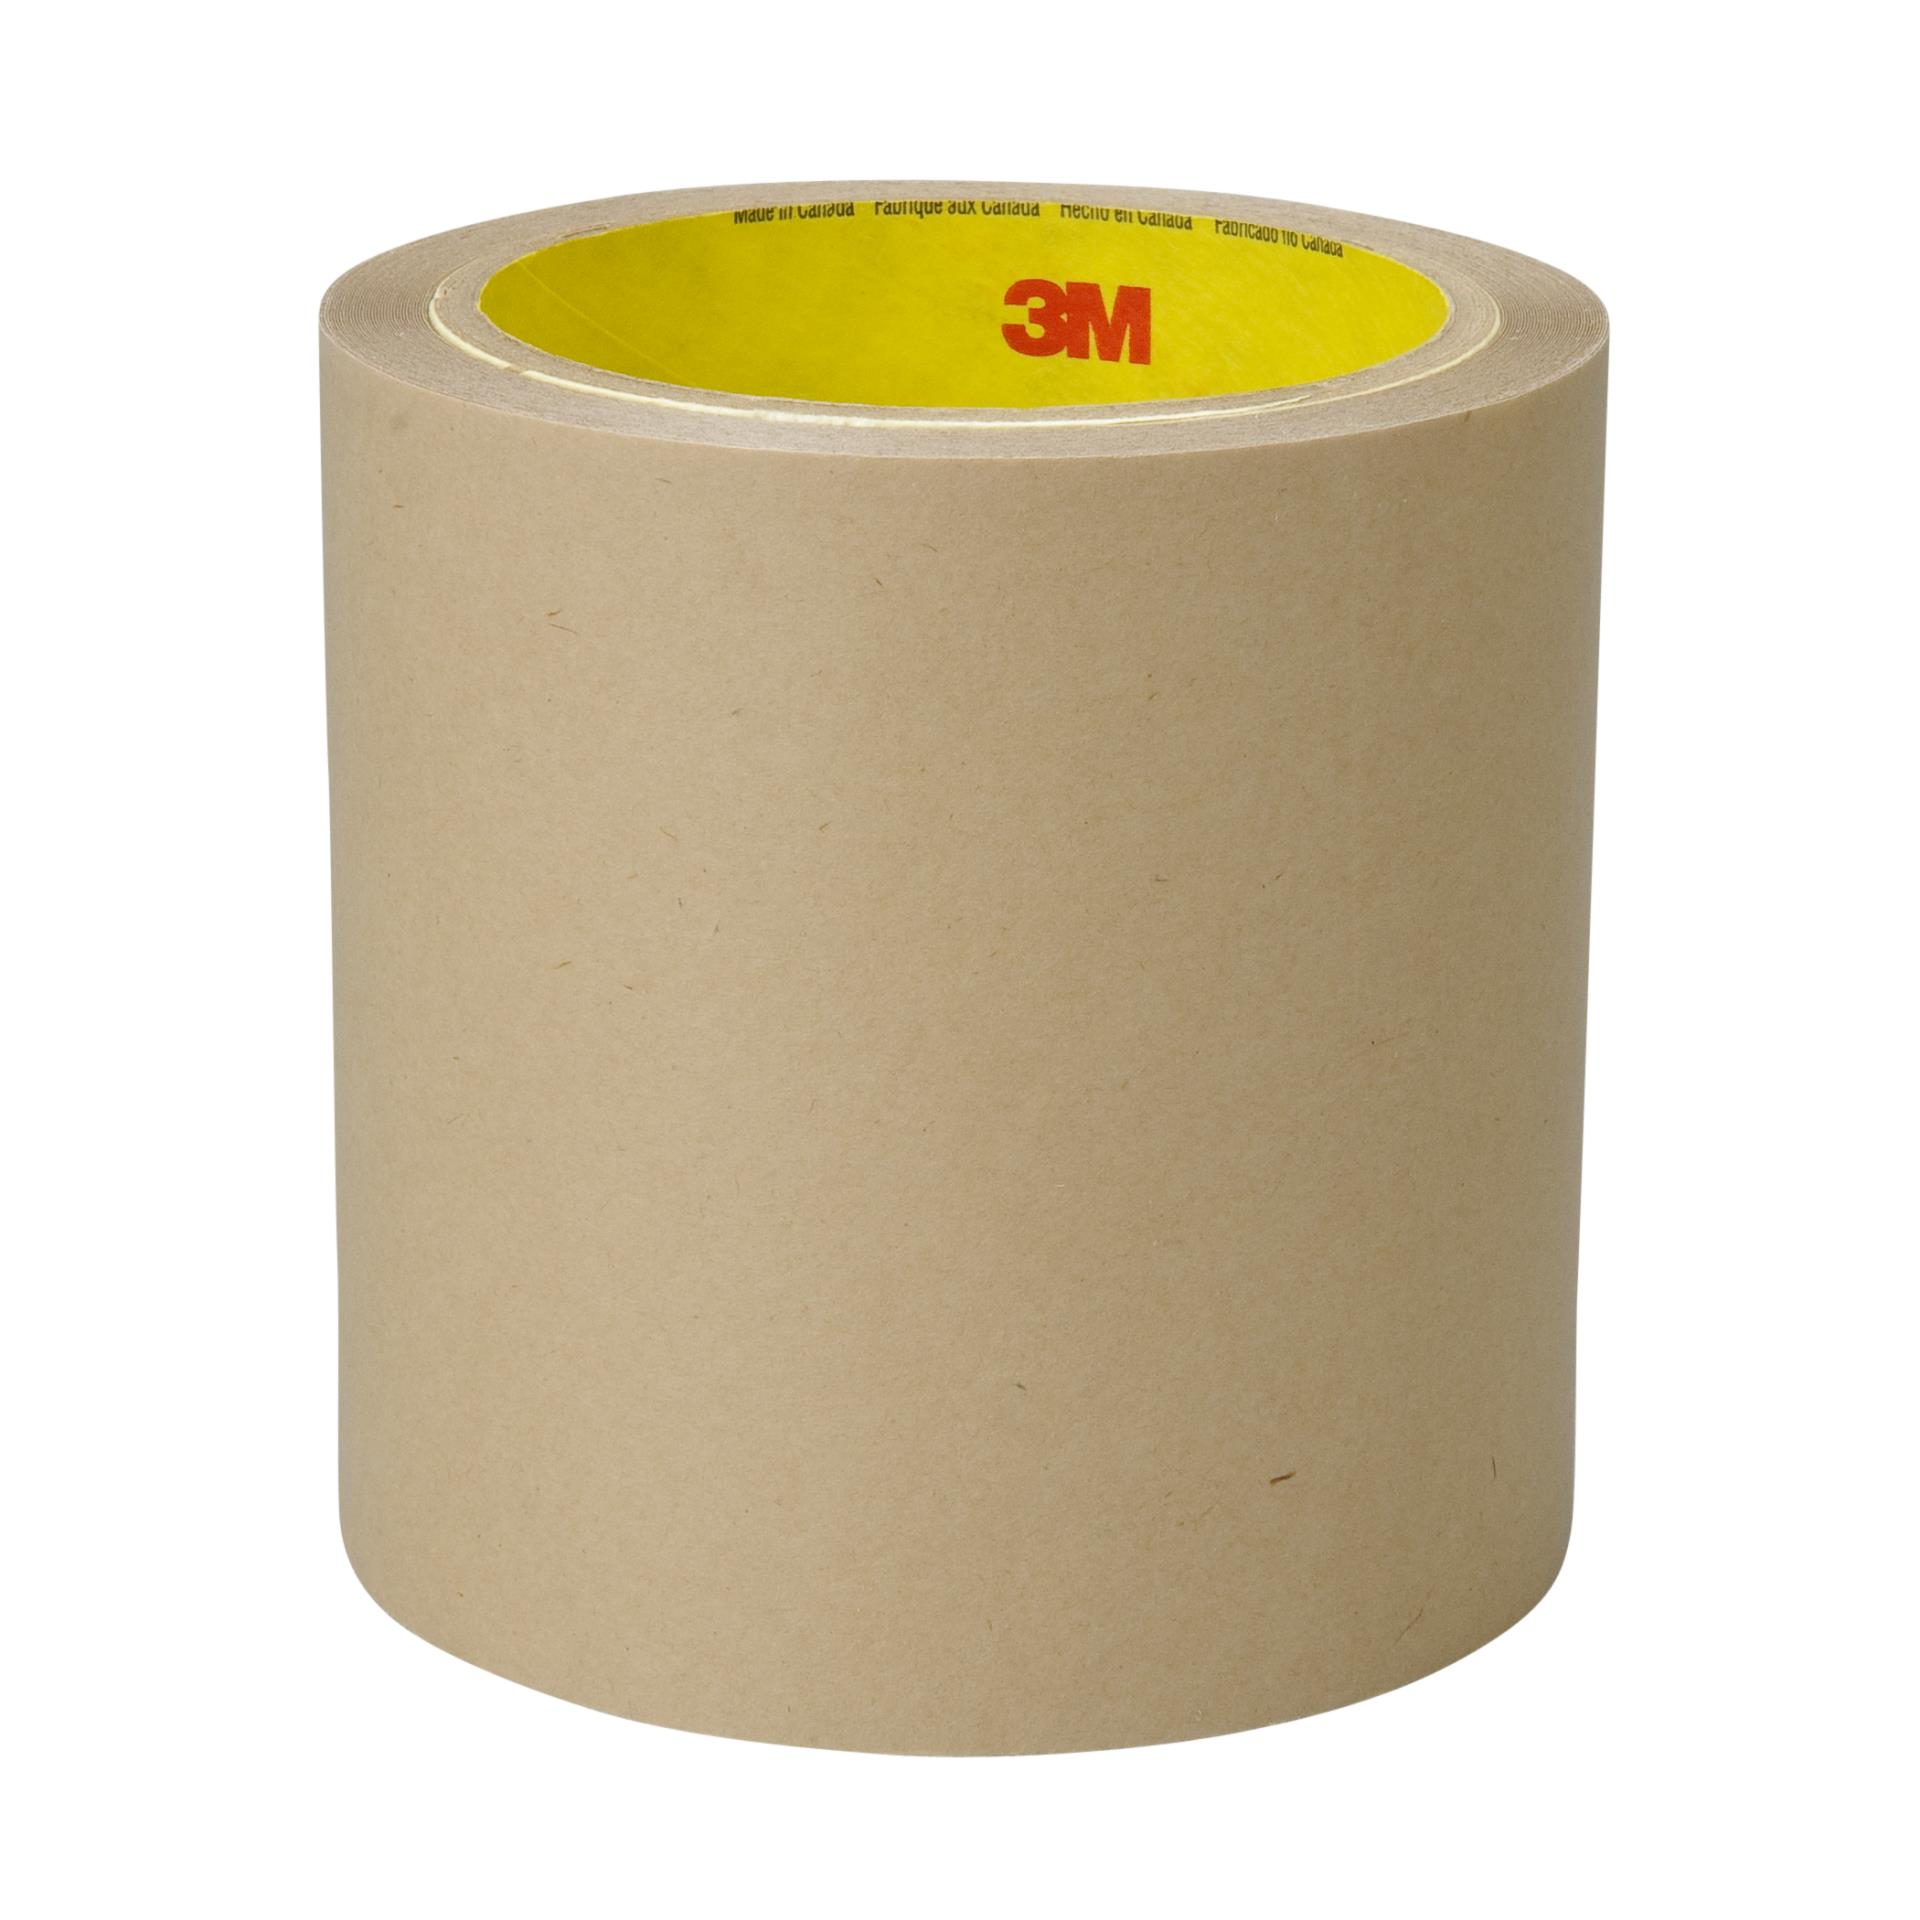 8MM Thermal Insulation Tape Polyimide Adhesive Insulating Adhesive Tape 33M BG 